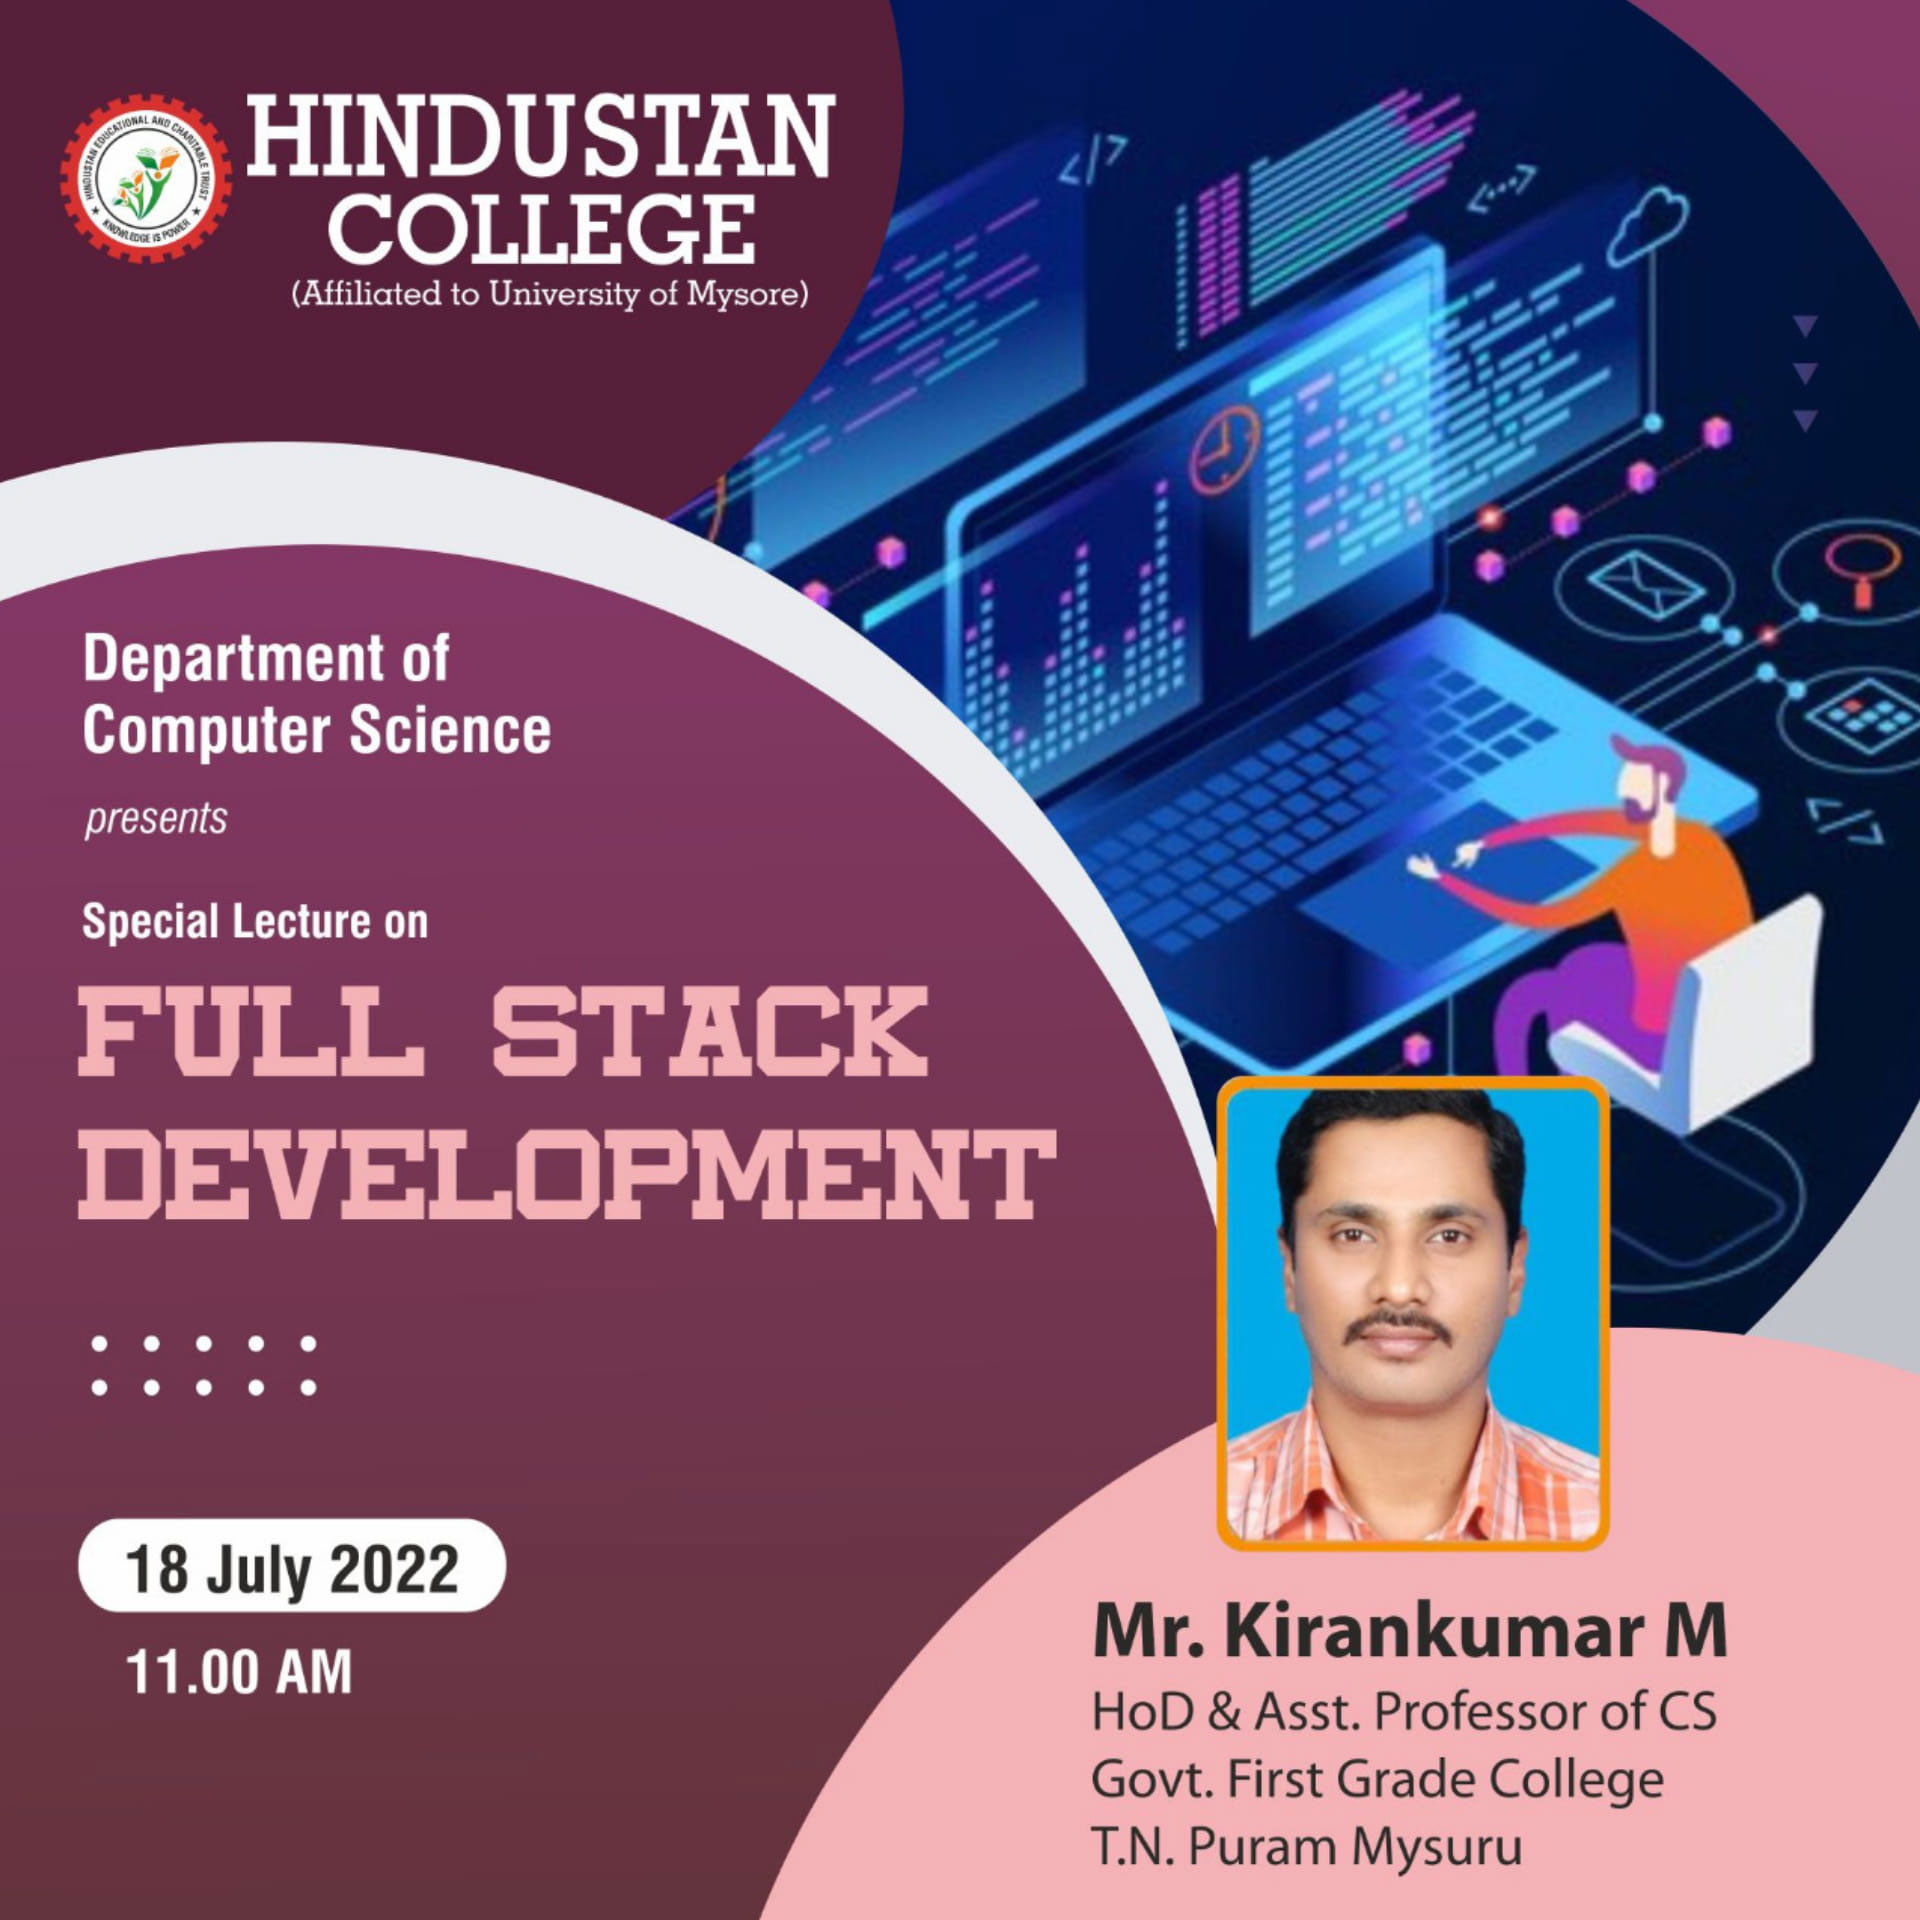 SPECIAL LECTURE ON “FULL STACK DEVELOPMENT”